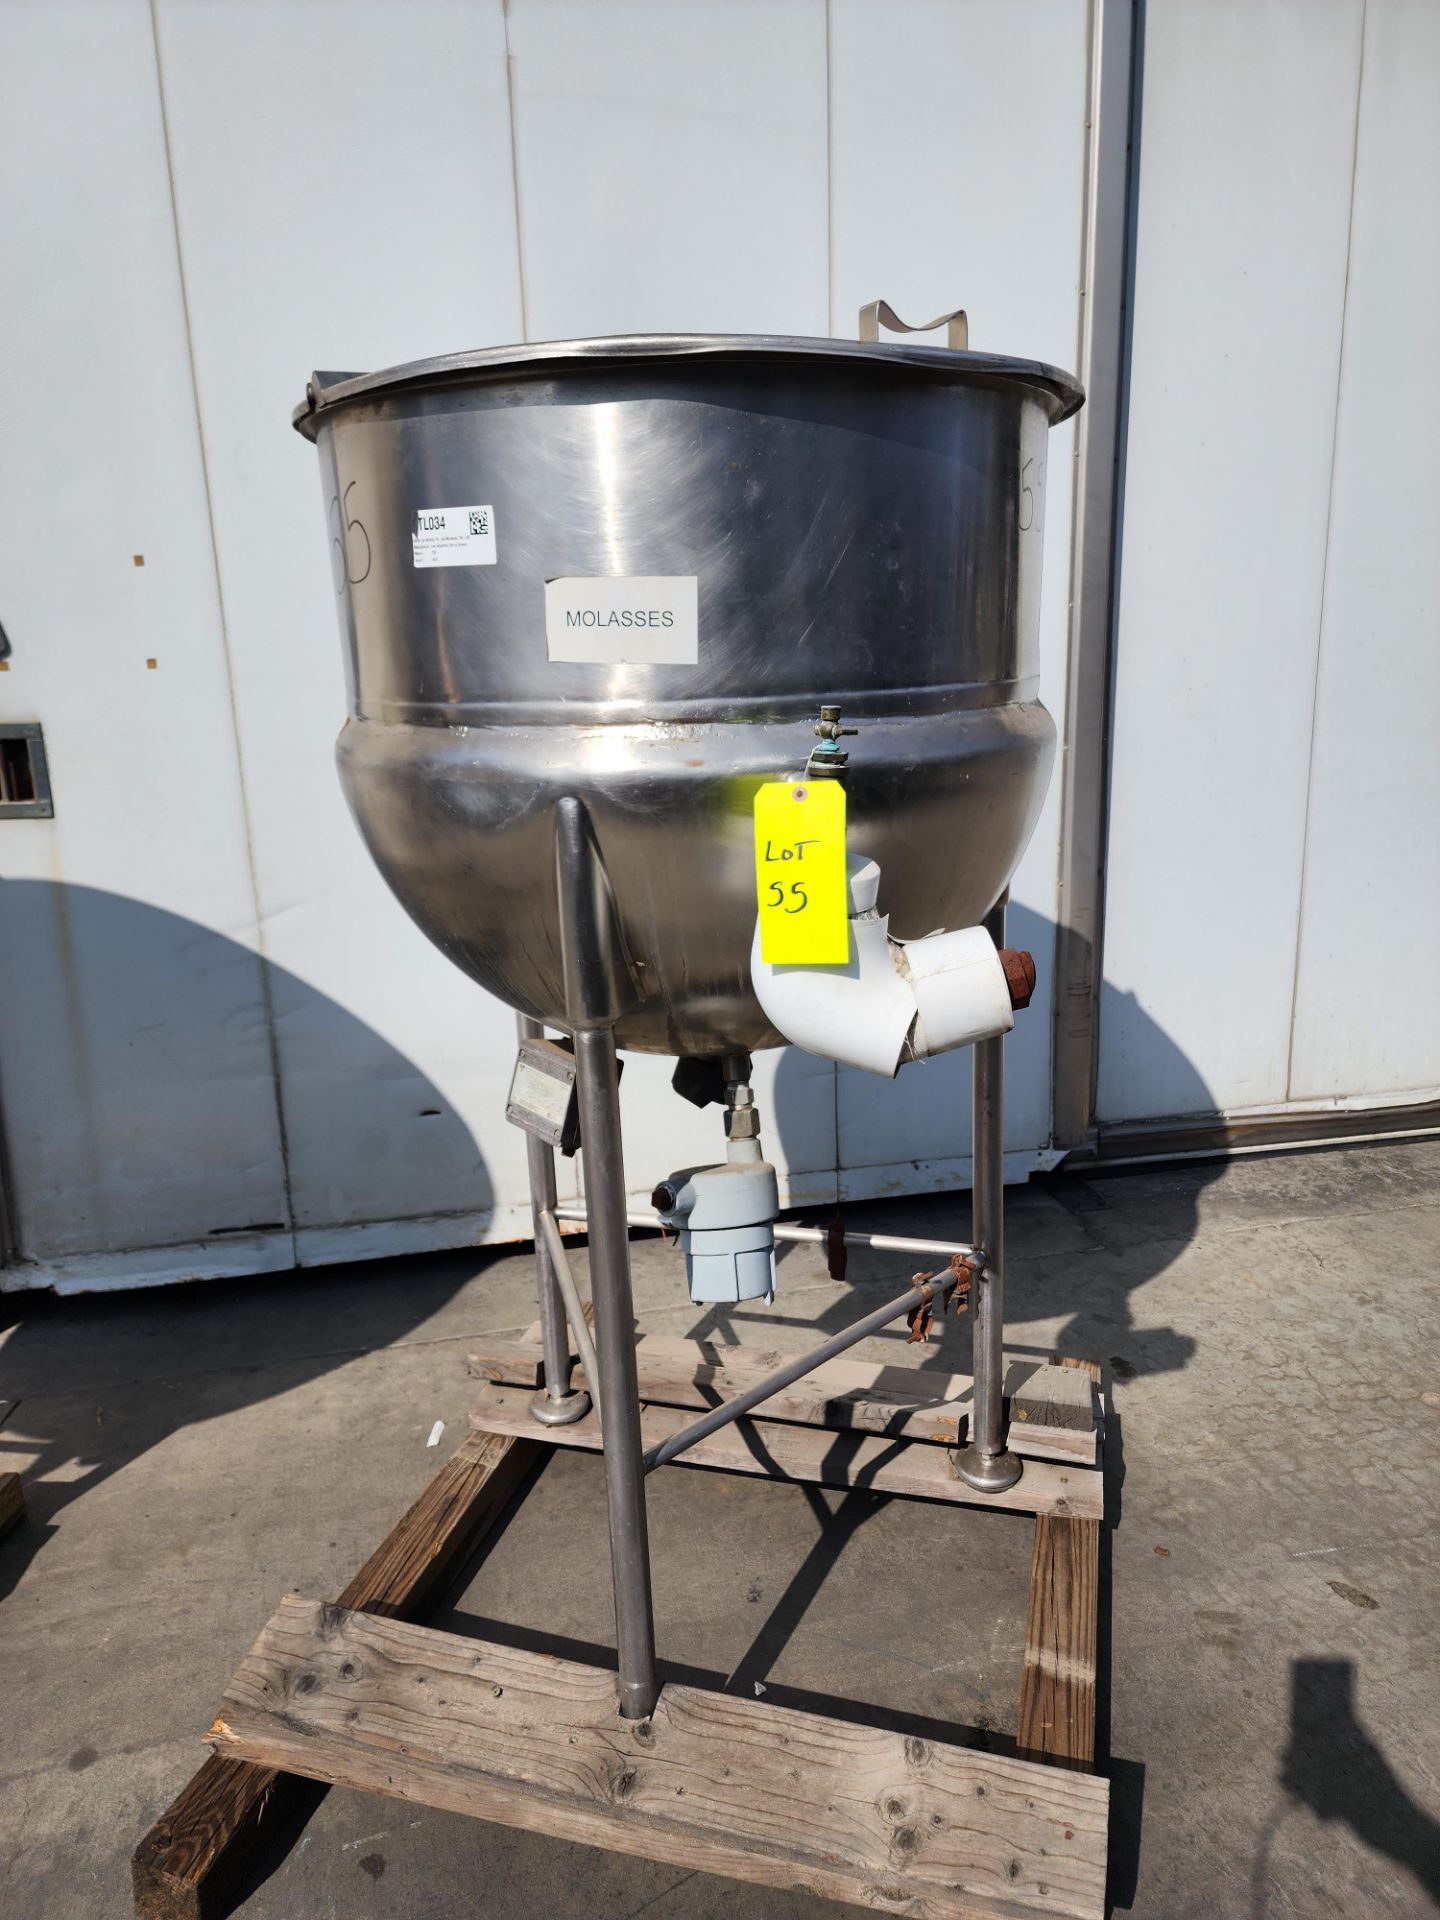 Lee Steam Fired Jacketed Kettle, Model 75D, SN 443 T, 75 Gallon Capacity.